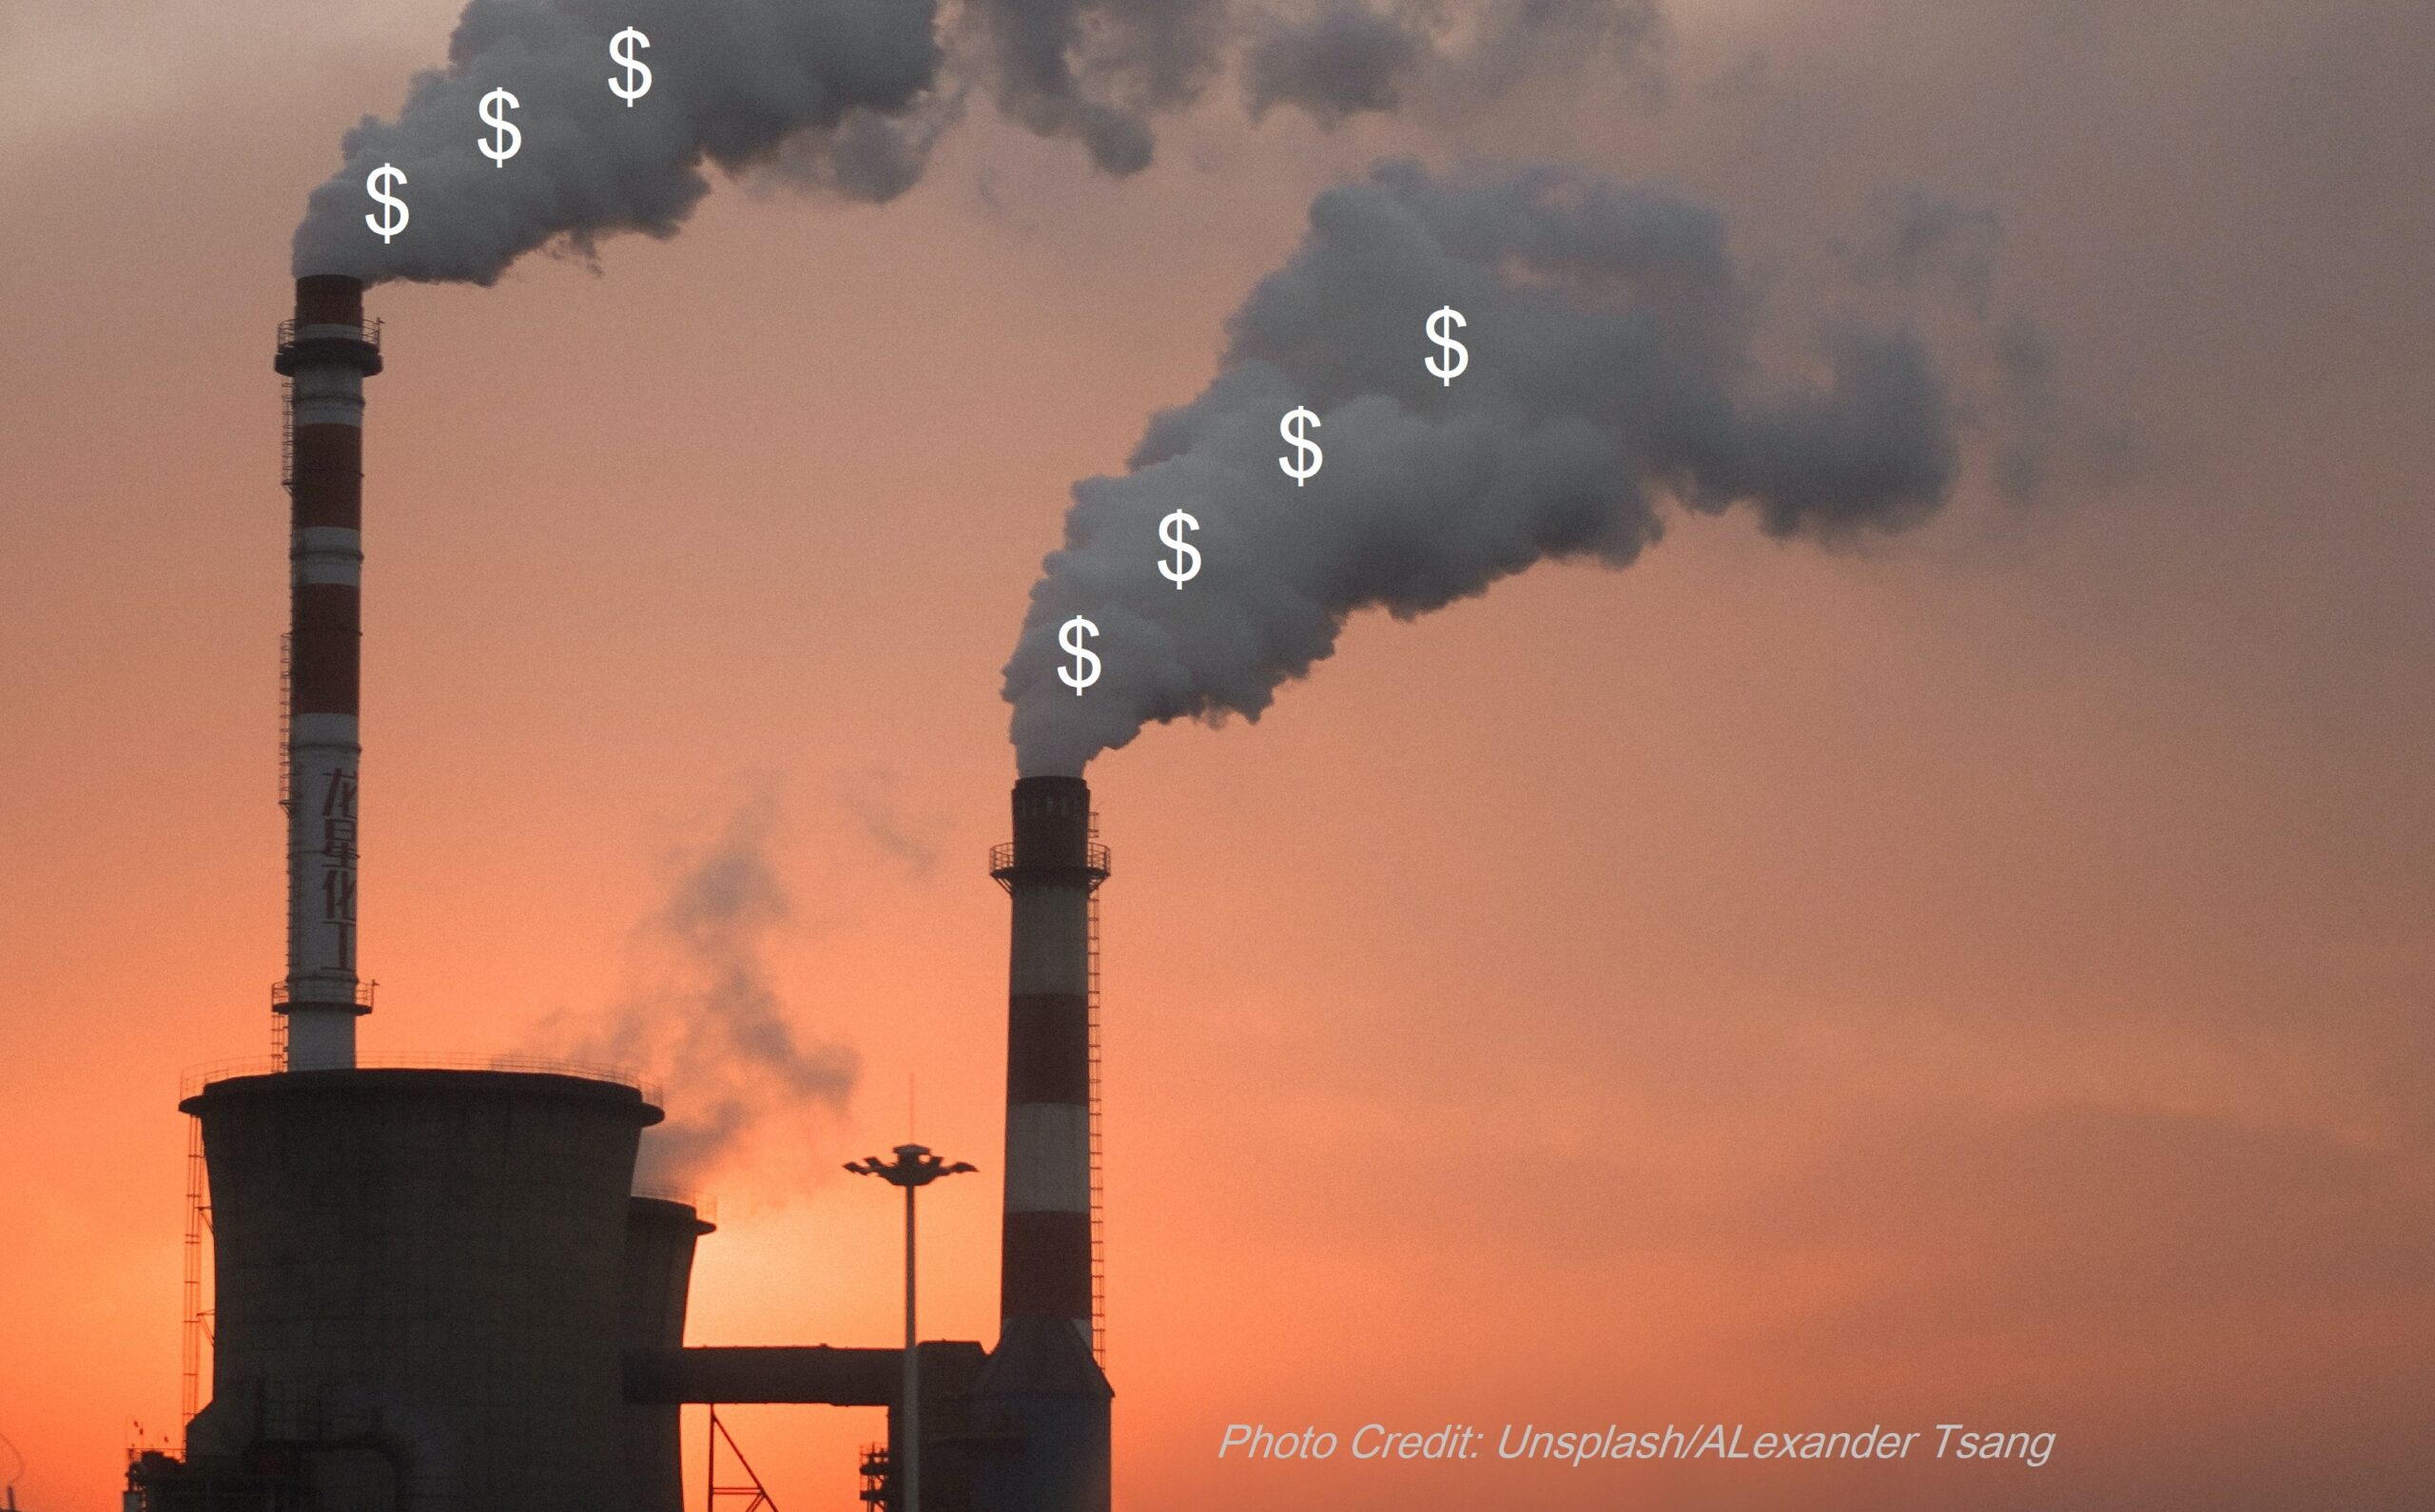 Reducing Air Pollution Improves GDP 200 Times Greater Than The Amount Spent